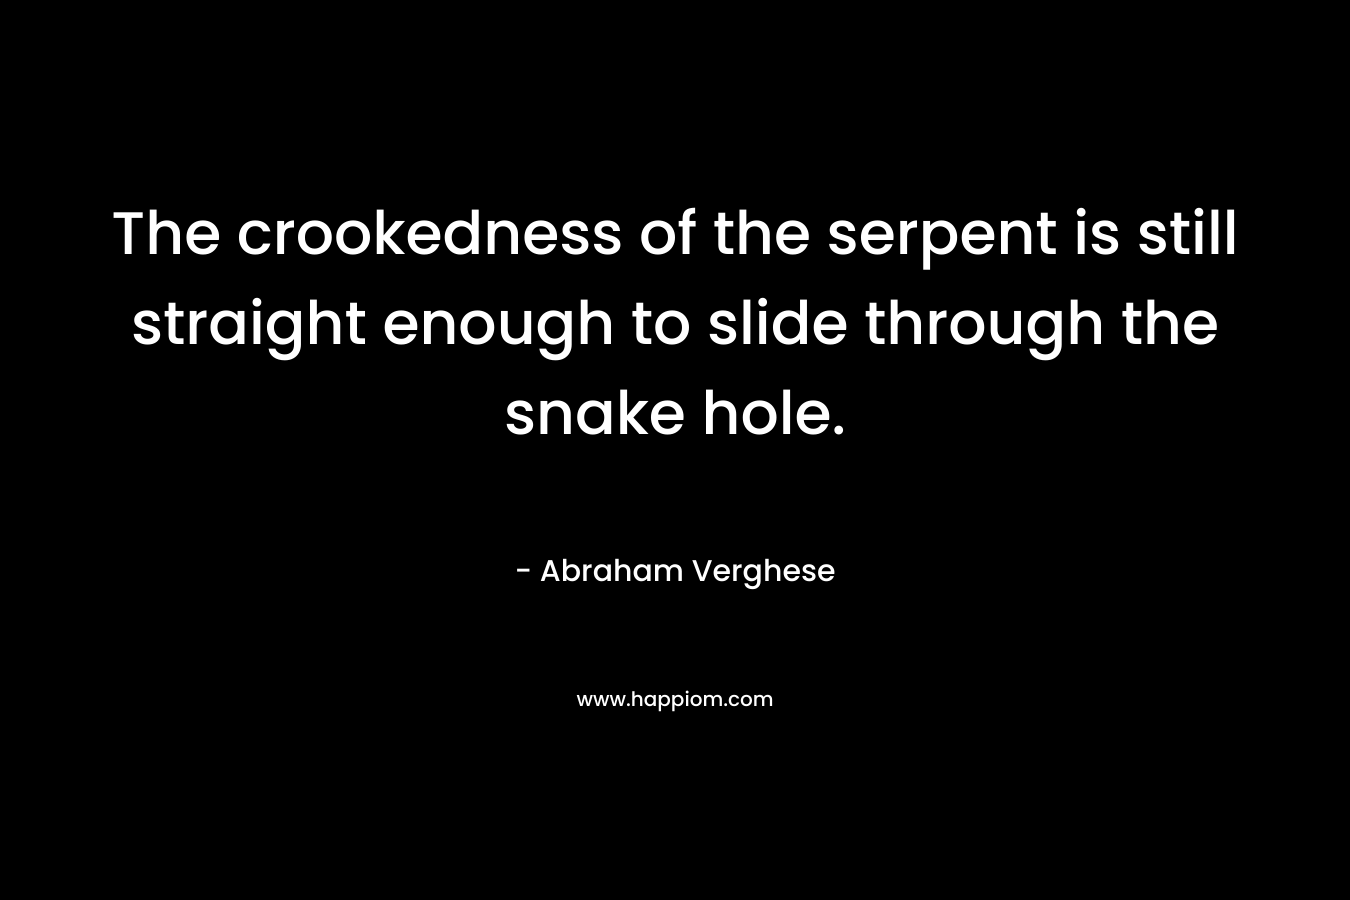 The crookedness of the serpent is still straight enough to slide through the snake hole.